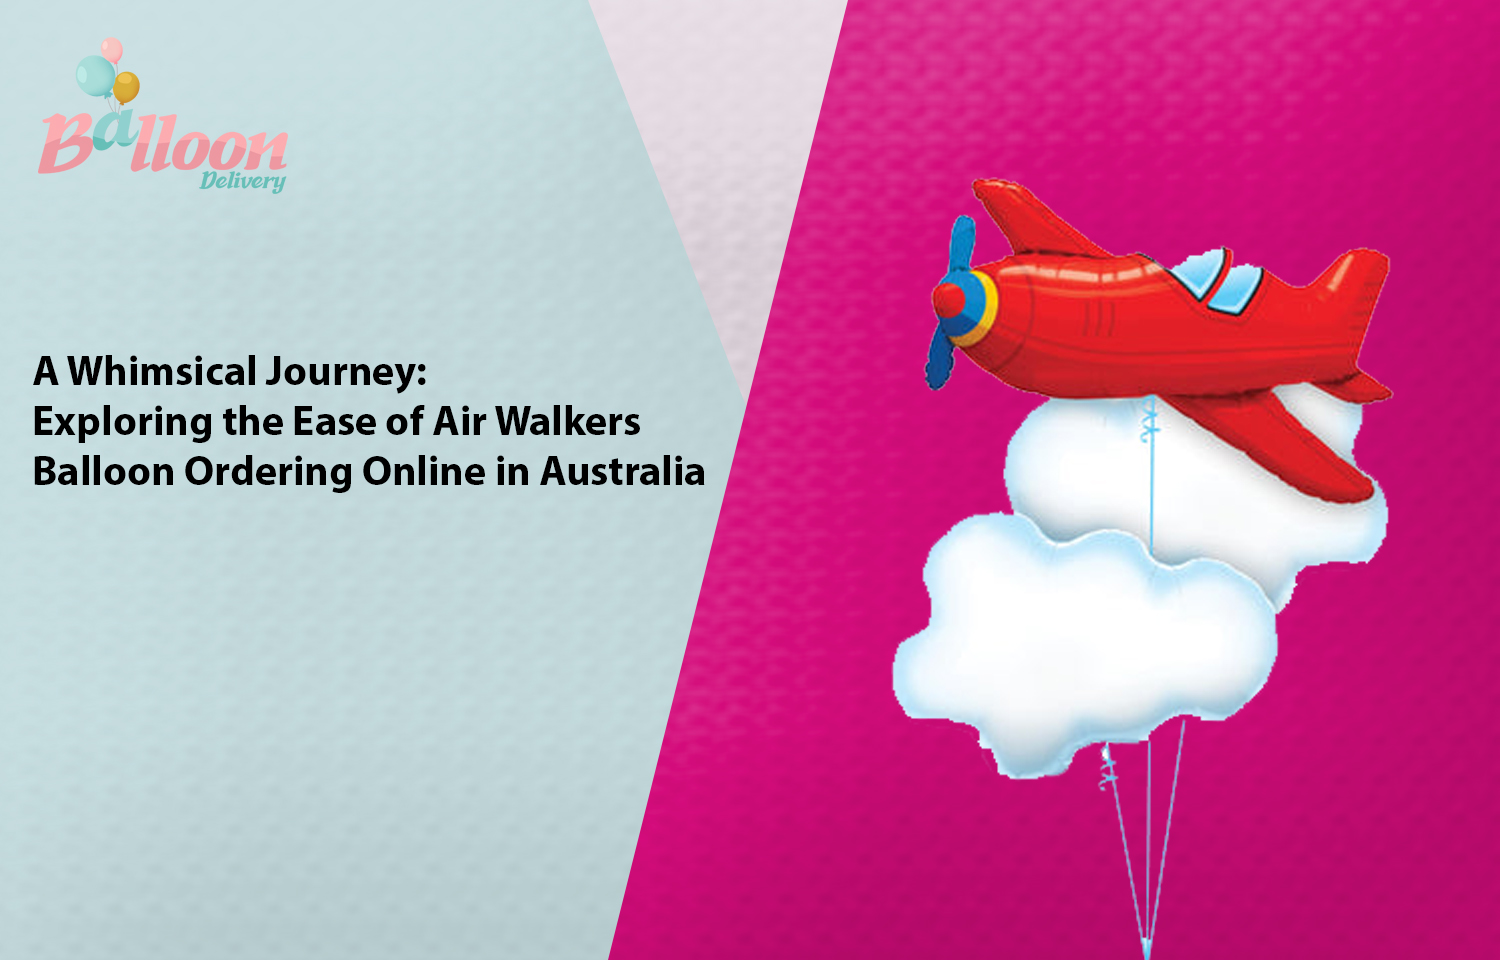 A Whimsical Journey: Exploring the Ease of Air Walkers Balloon Ordering Online in Australia